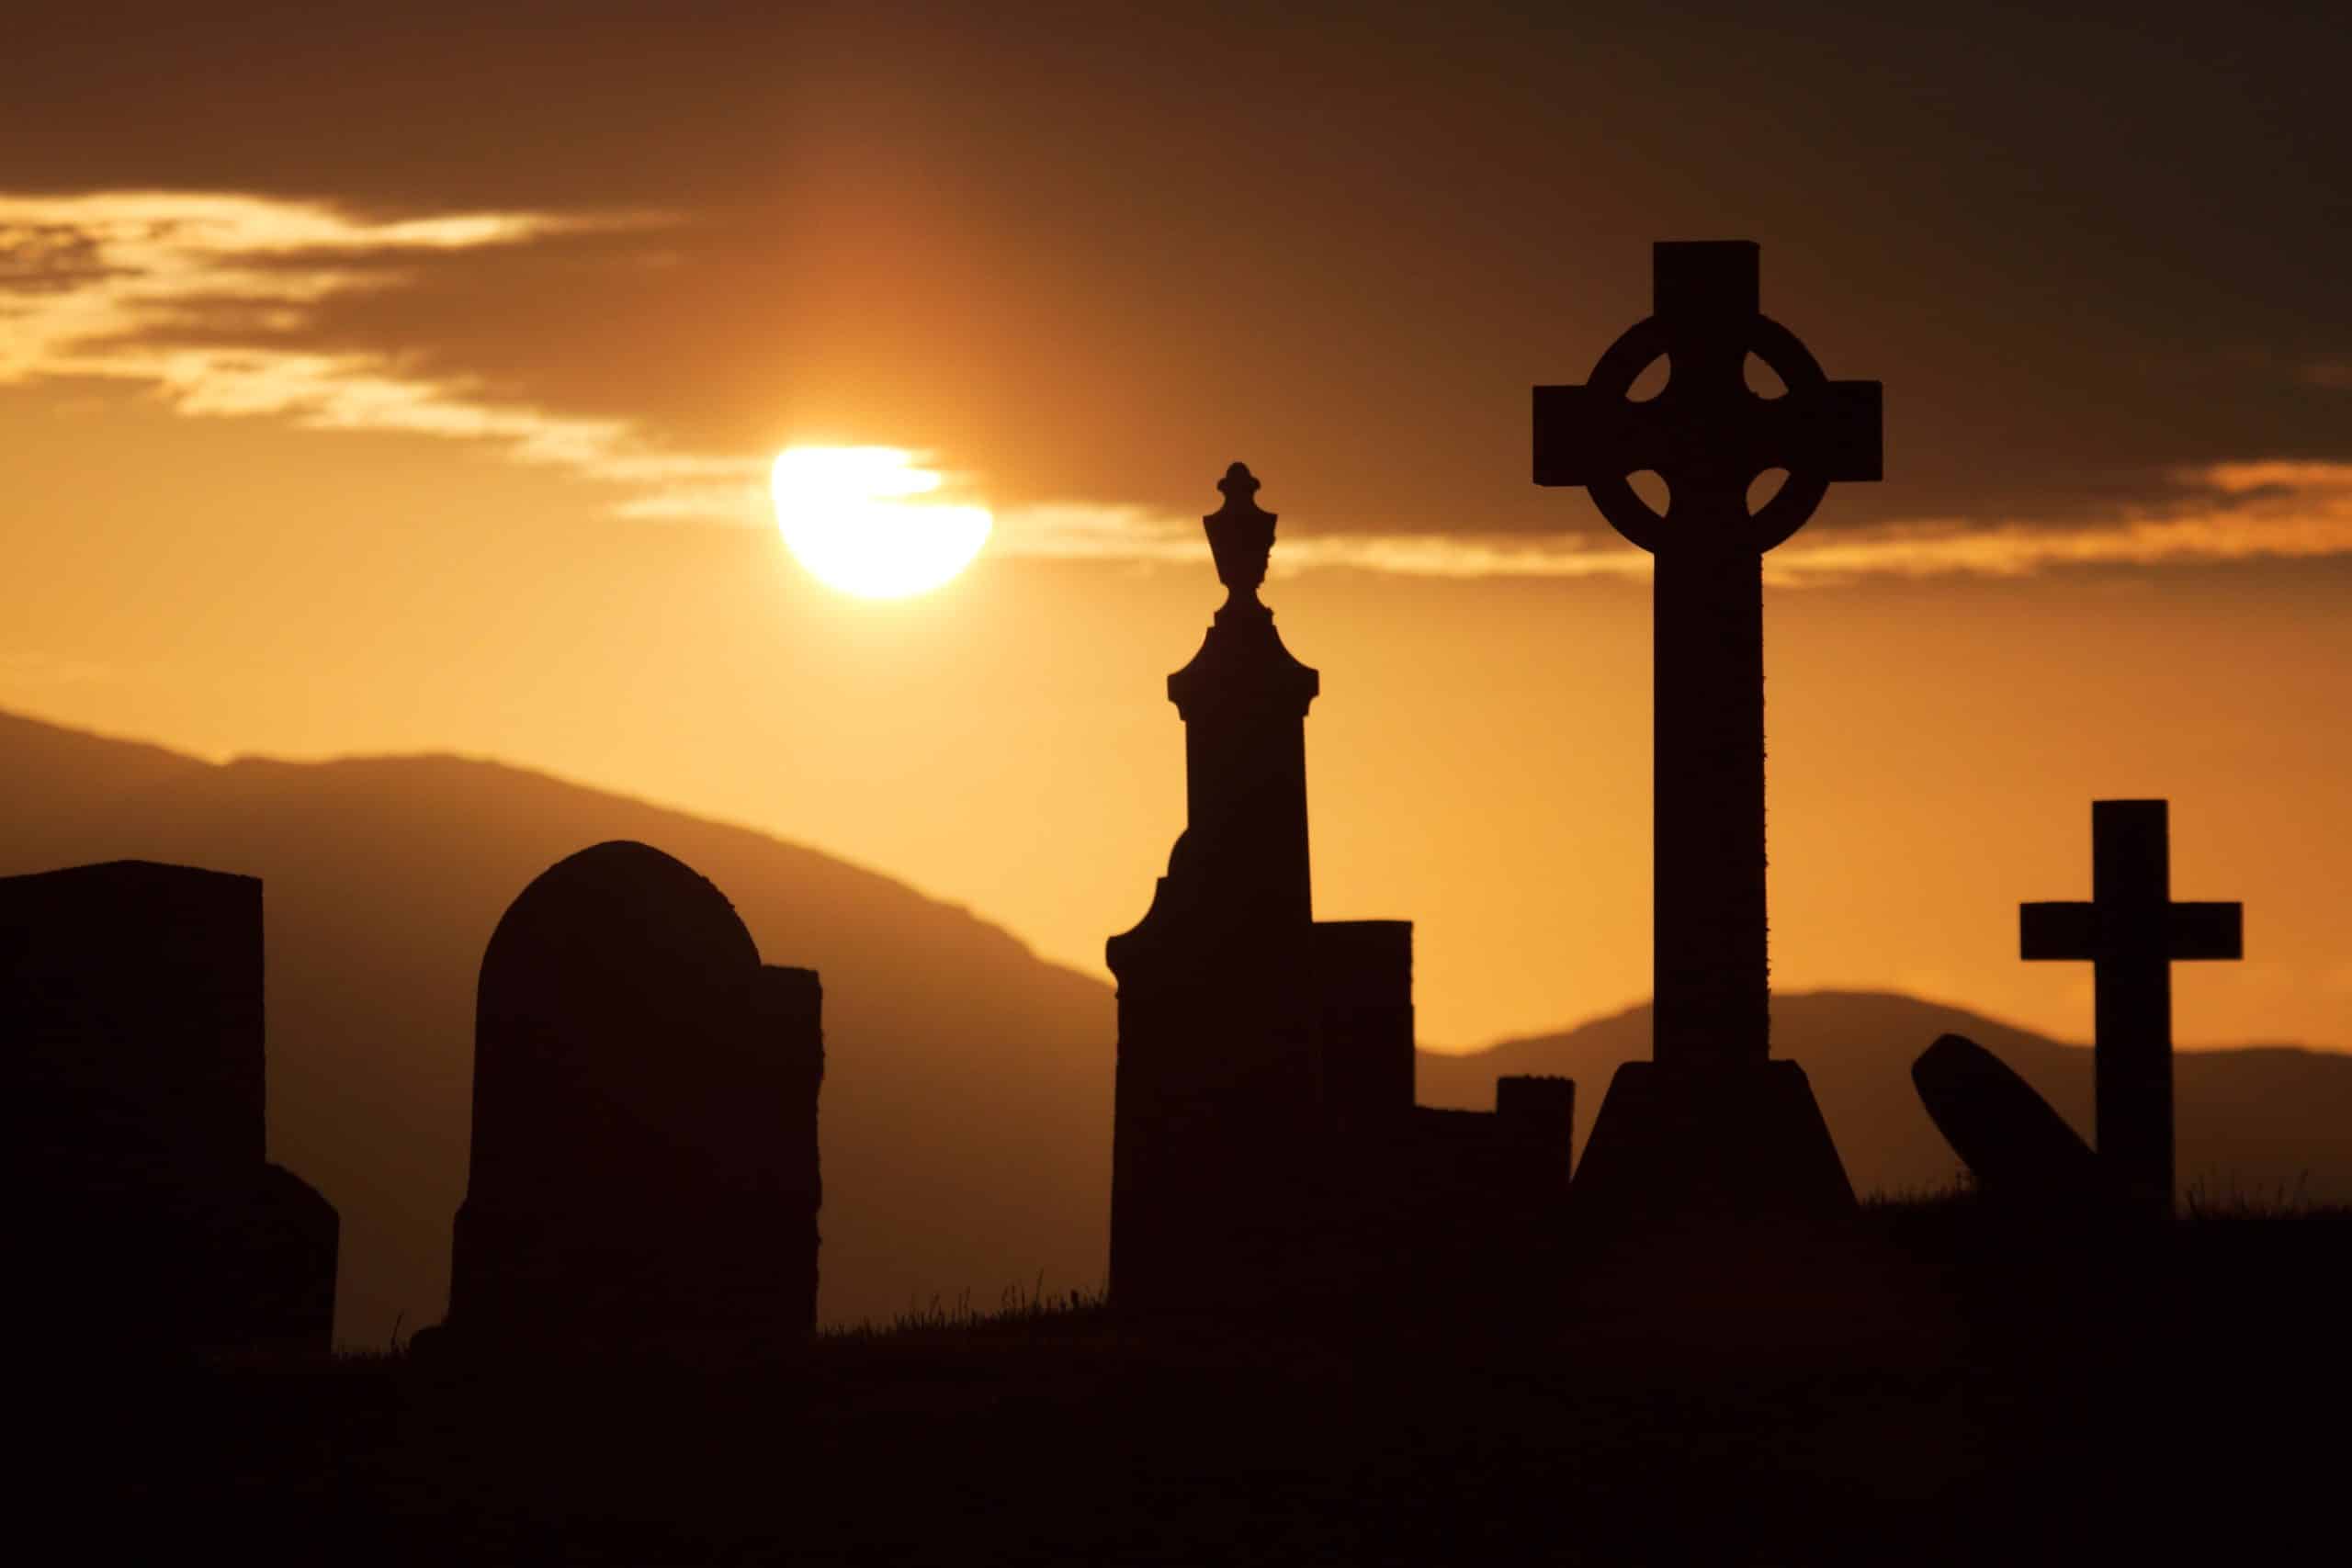 A cemetery with Irish crosses silhouetted against the sun.